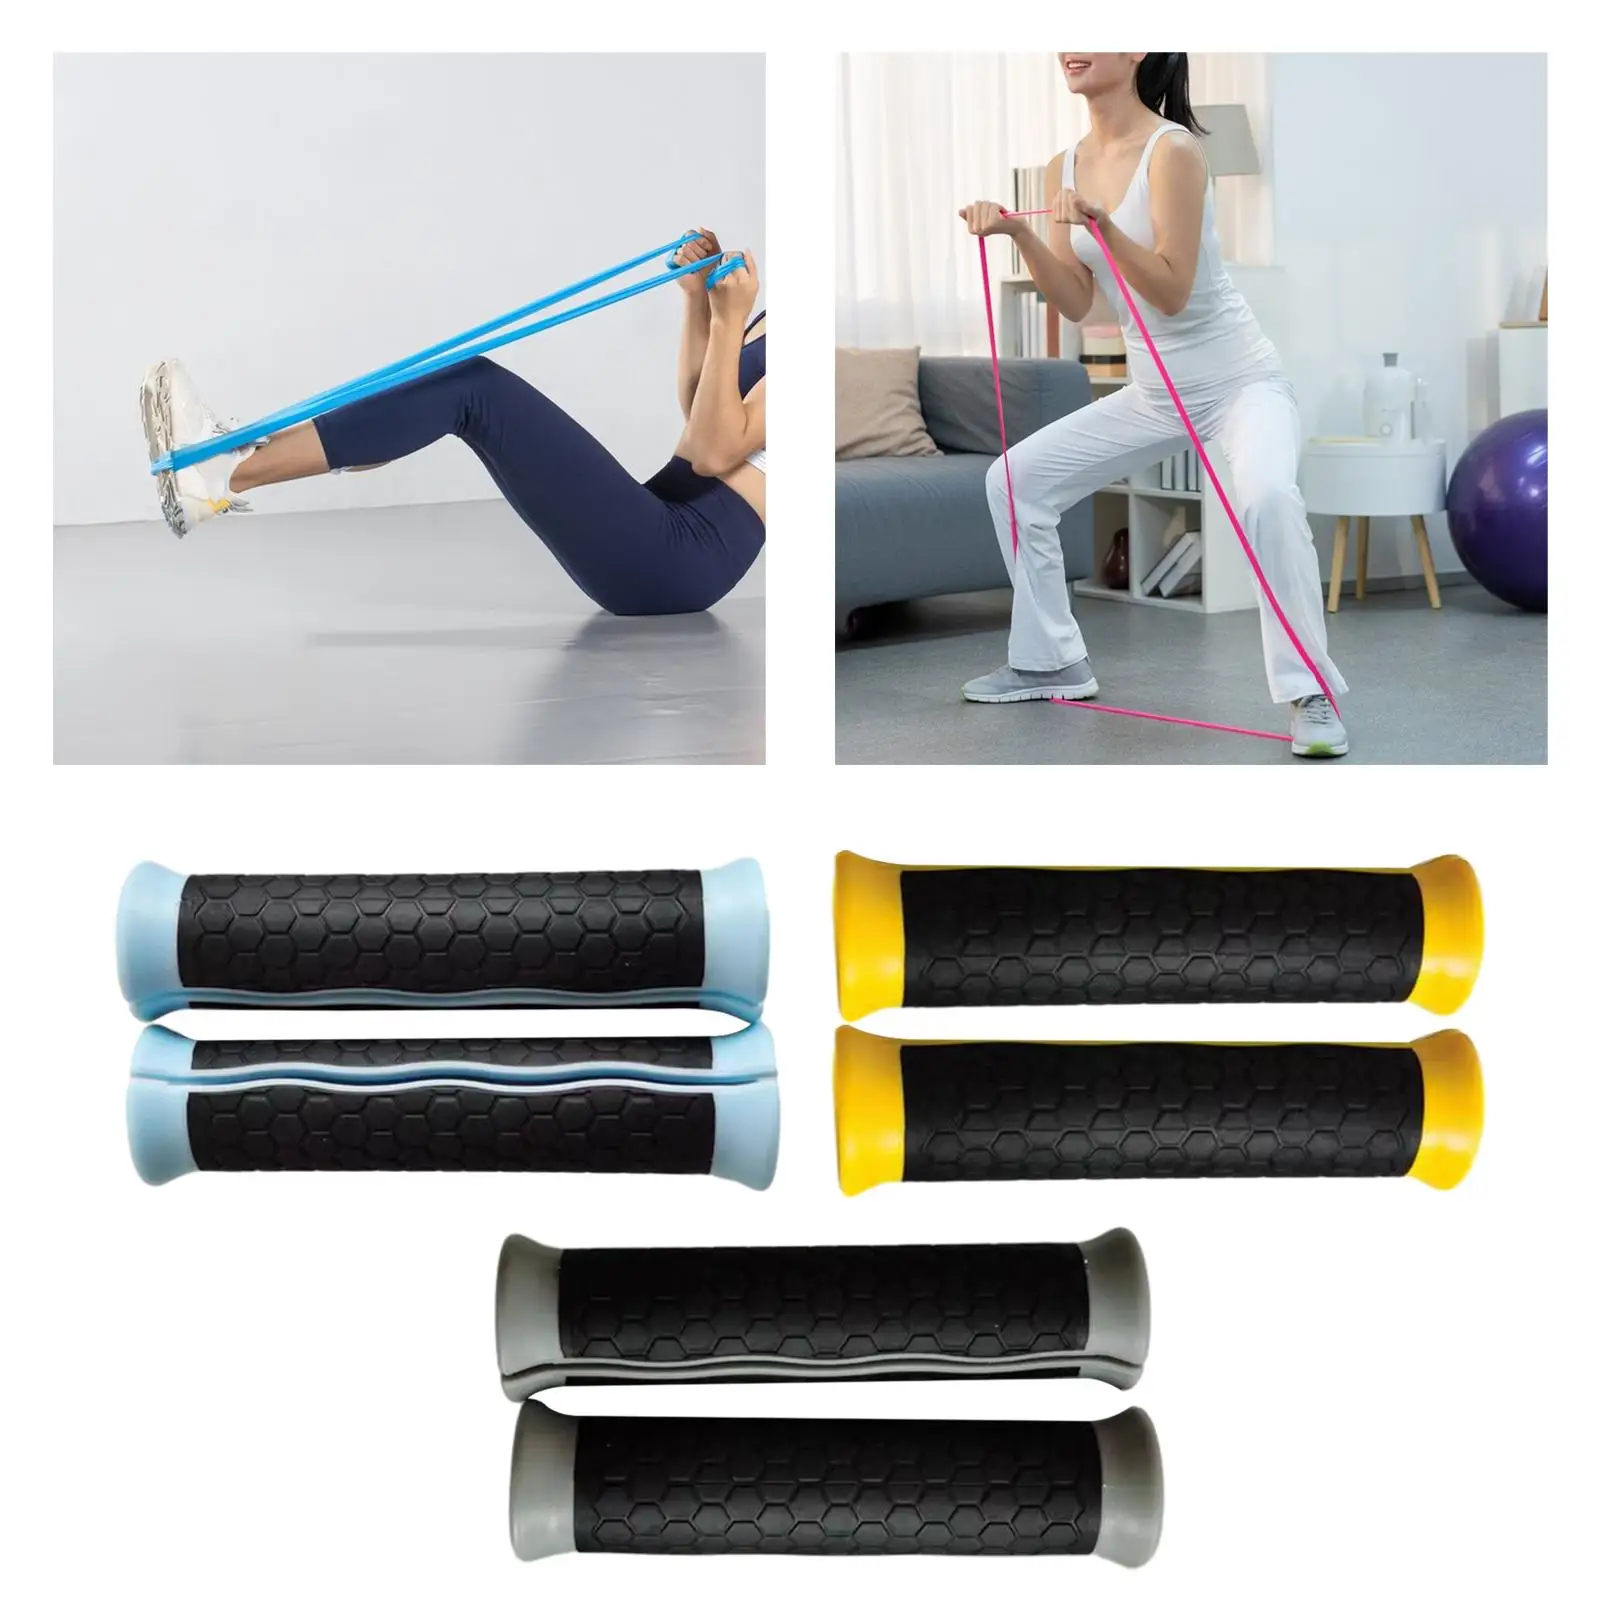 2x Resistance Bands Foam Handles Heavy Duty Fitness Equipment Replace Workout Accessories Protect Your Hands Exercise Handles